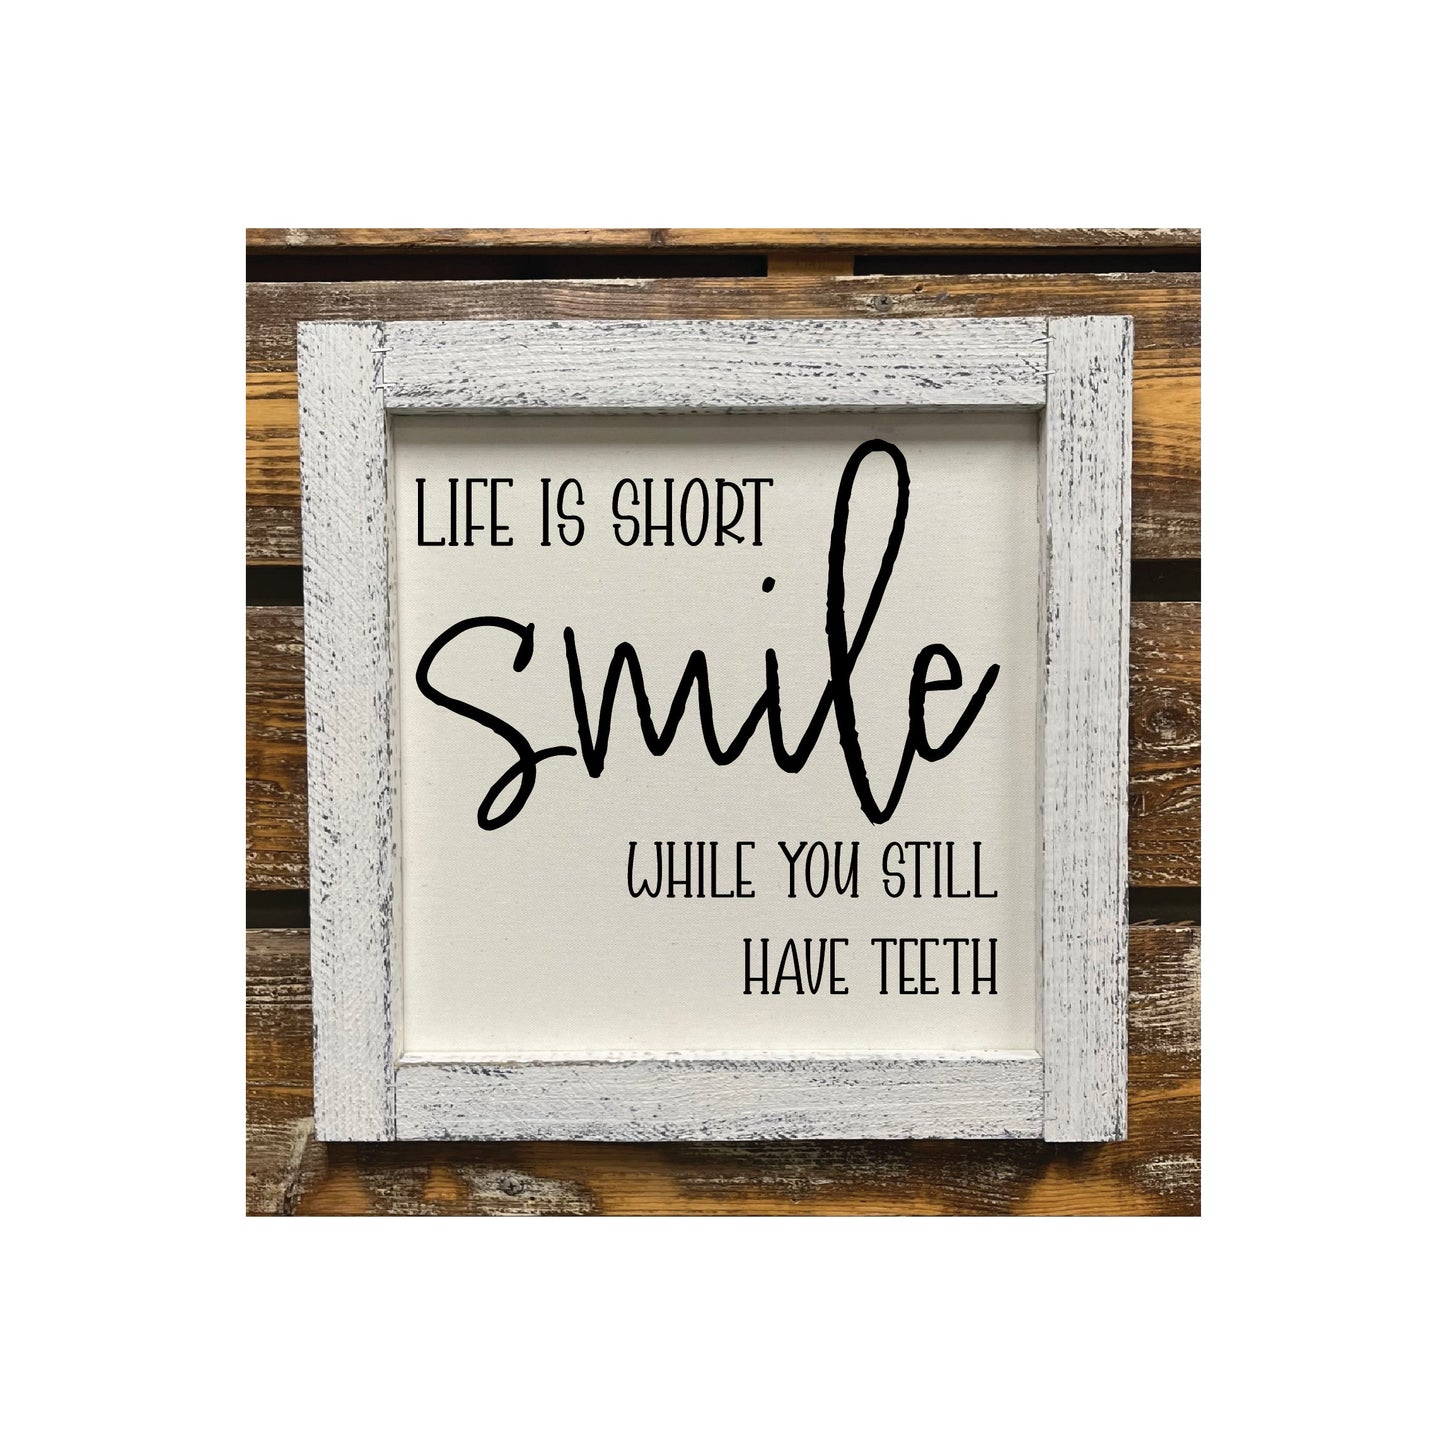 Life is Short... Smile